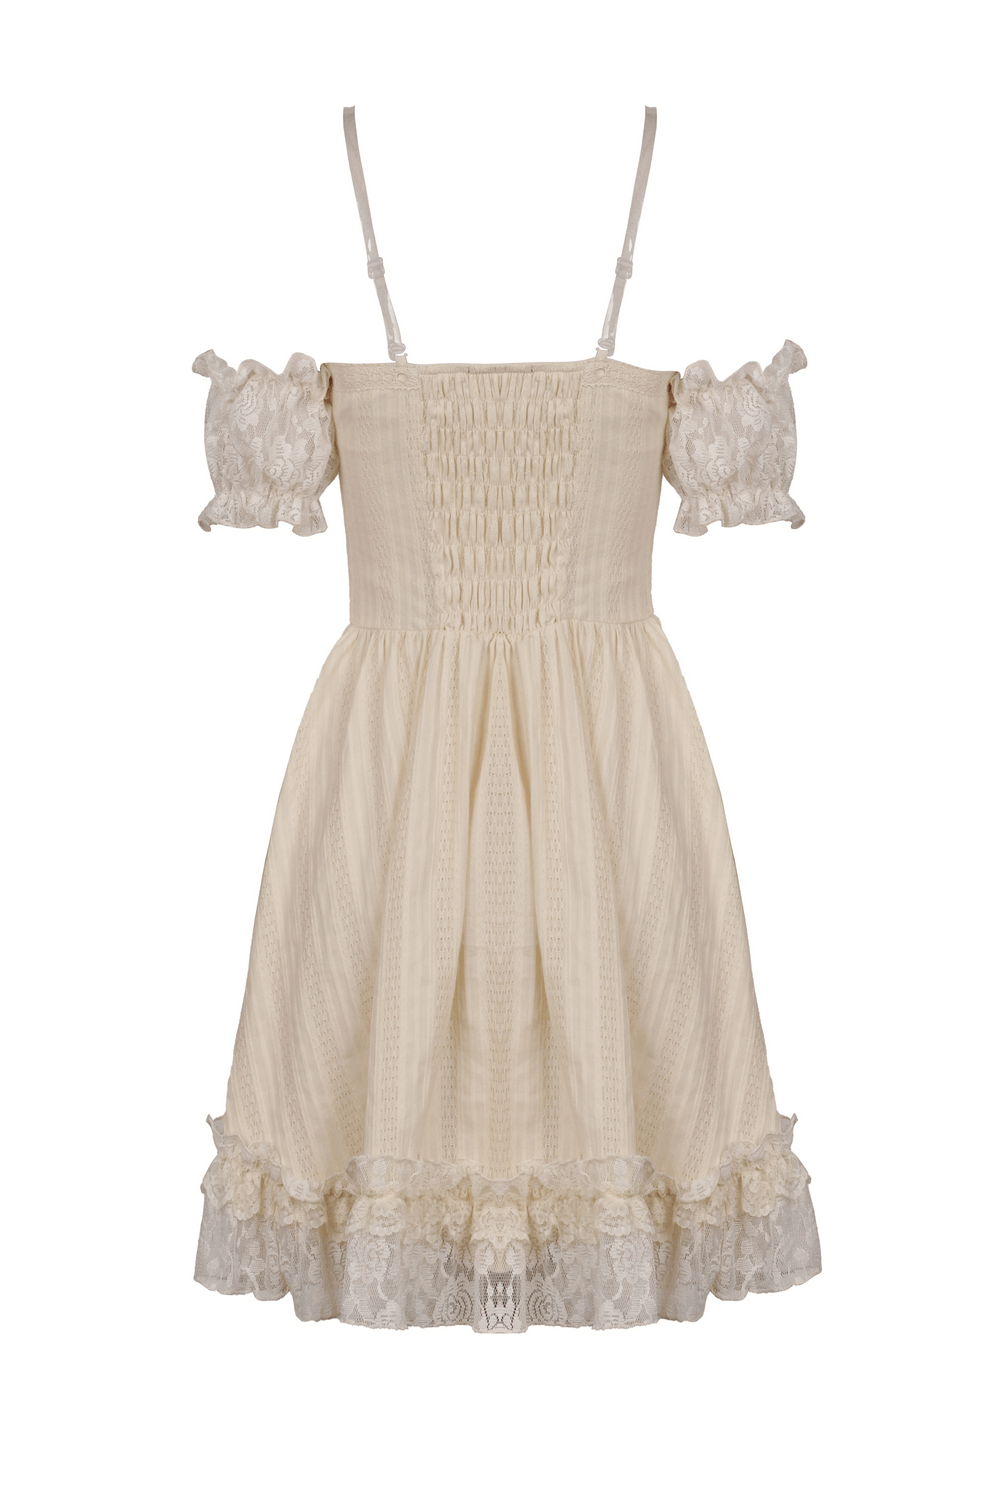 Women's Lace Mini Dress: Ruffled Layers And Floral Detail